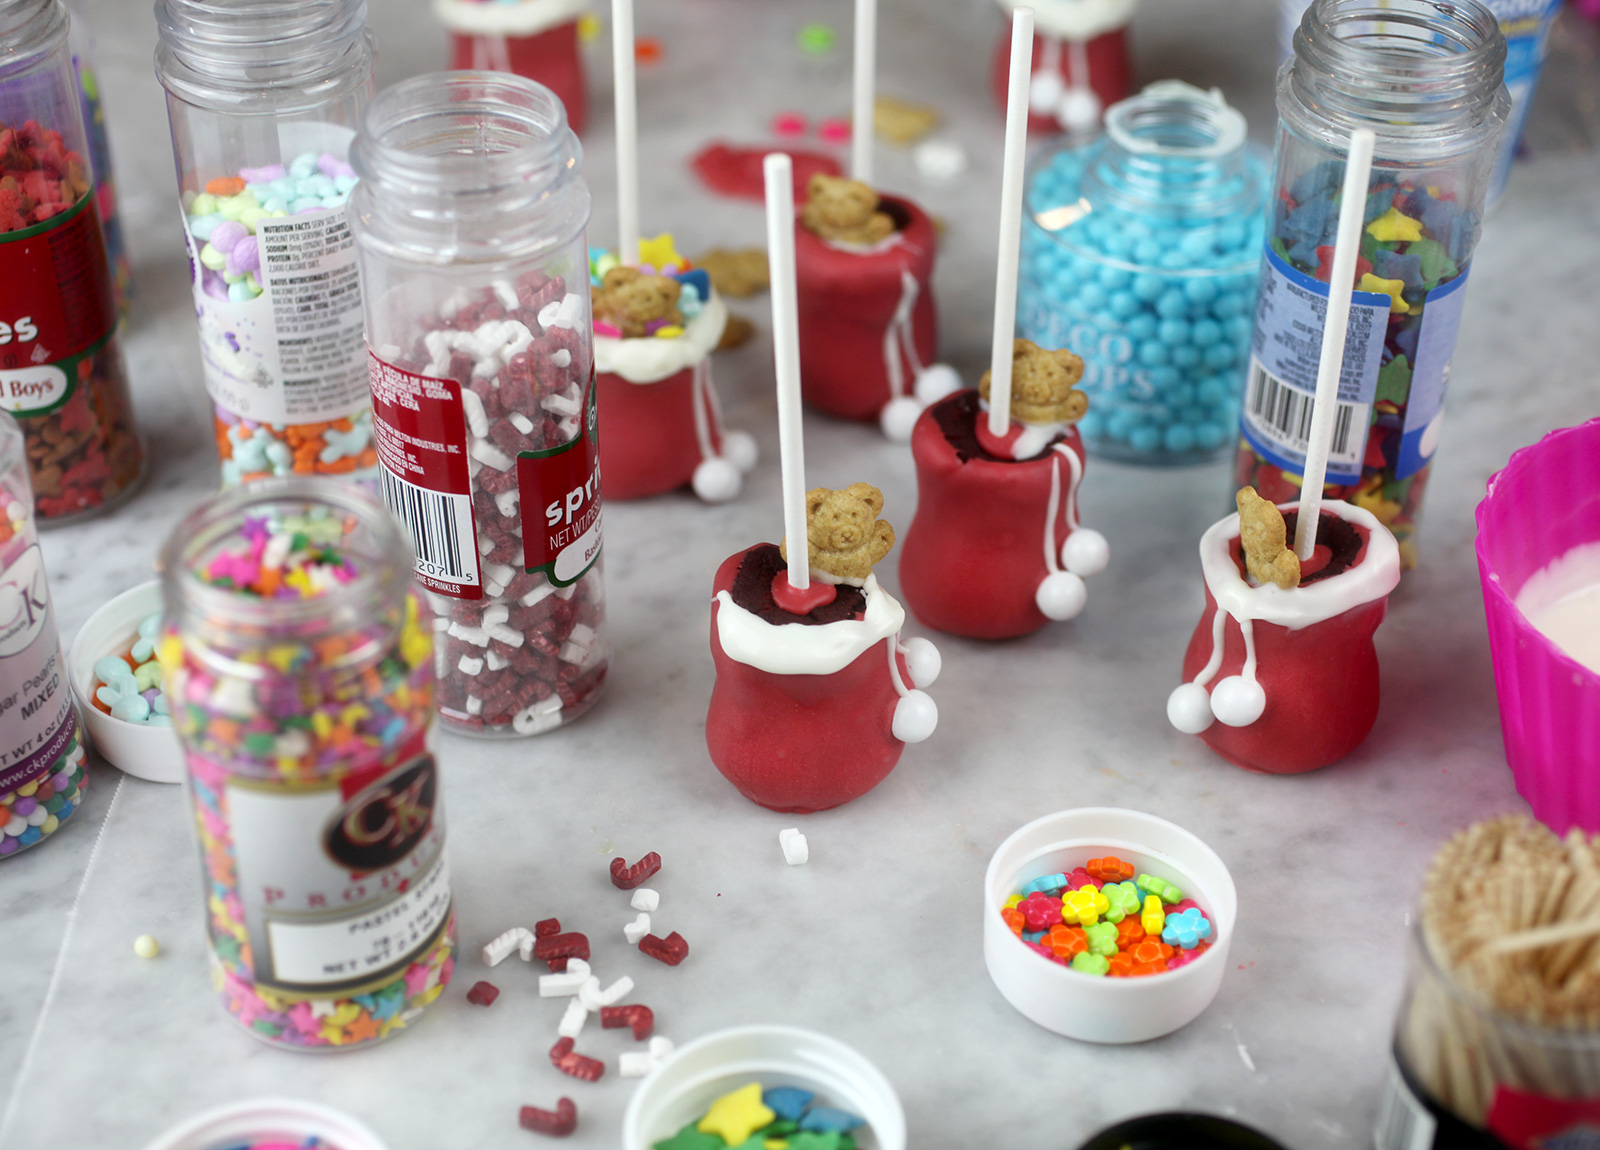 Unusual Party Bag Filler Ideas  Cake pop designs, Hot chocolate gifts,  Cake pops